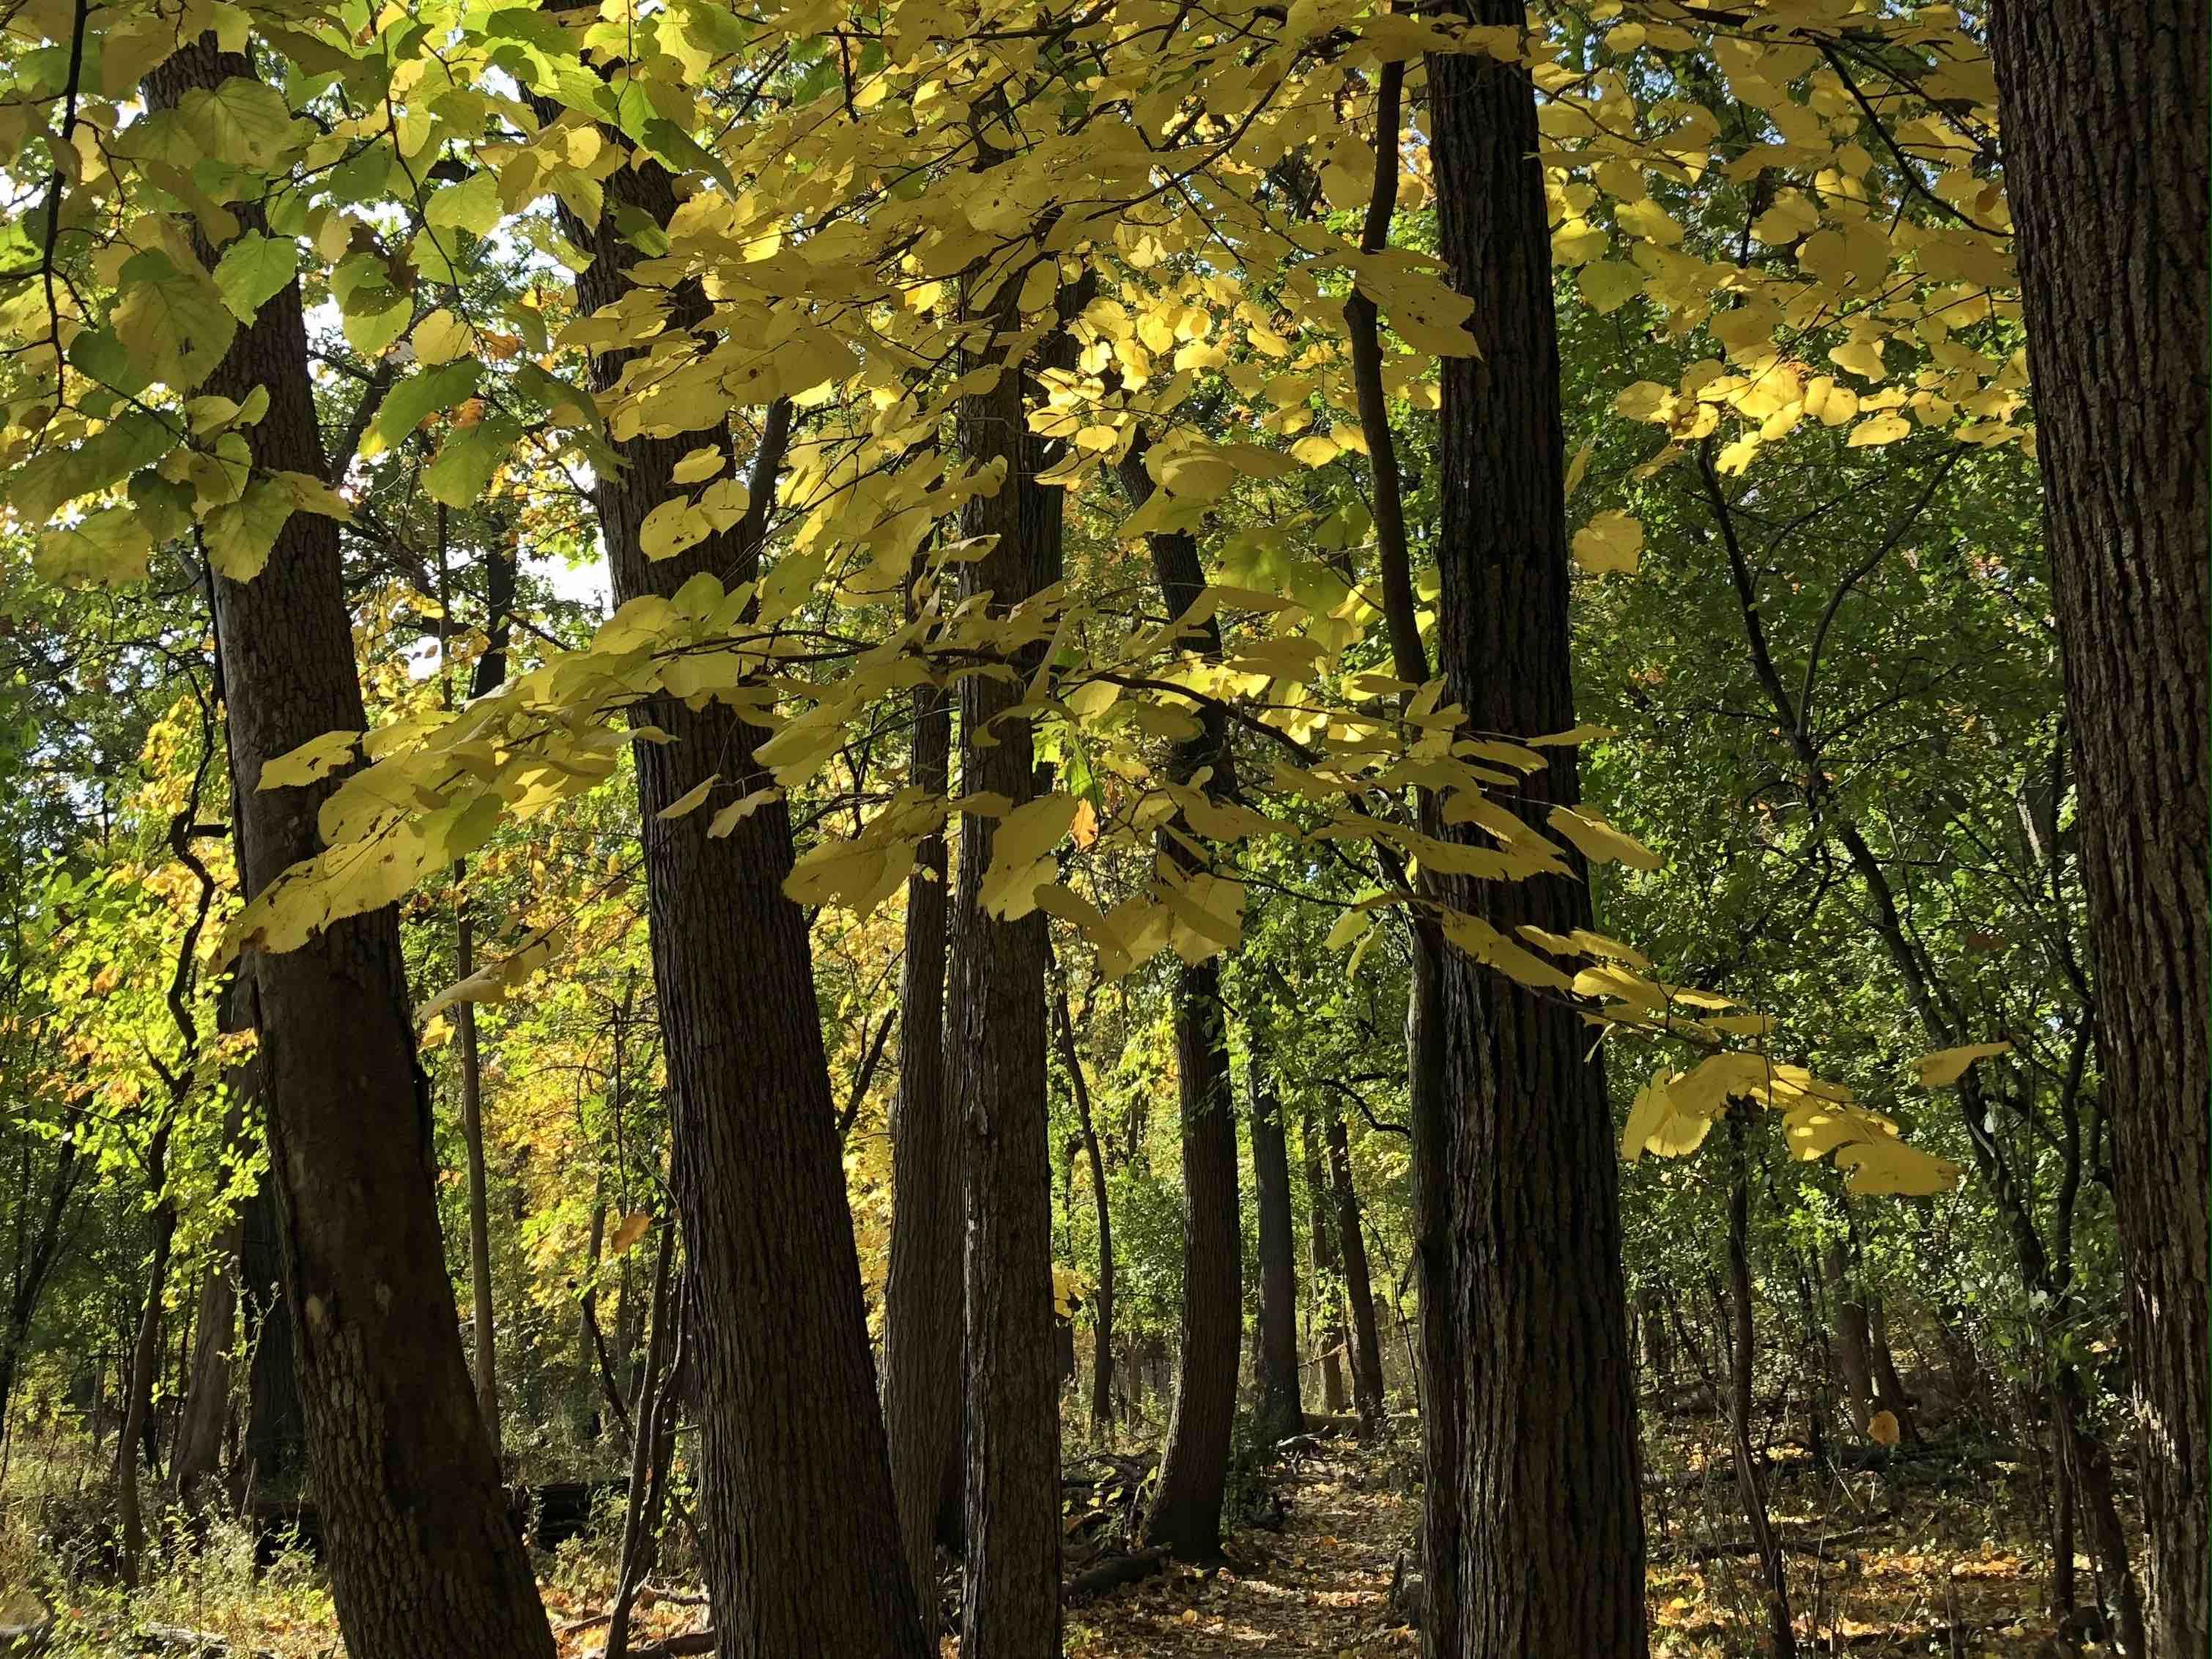 LaBagh Woods, Cook County forest preserve. (Patty Wetli / WTTW News)